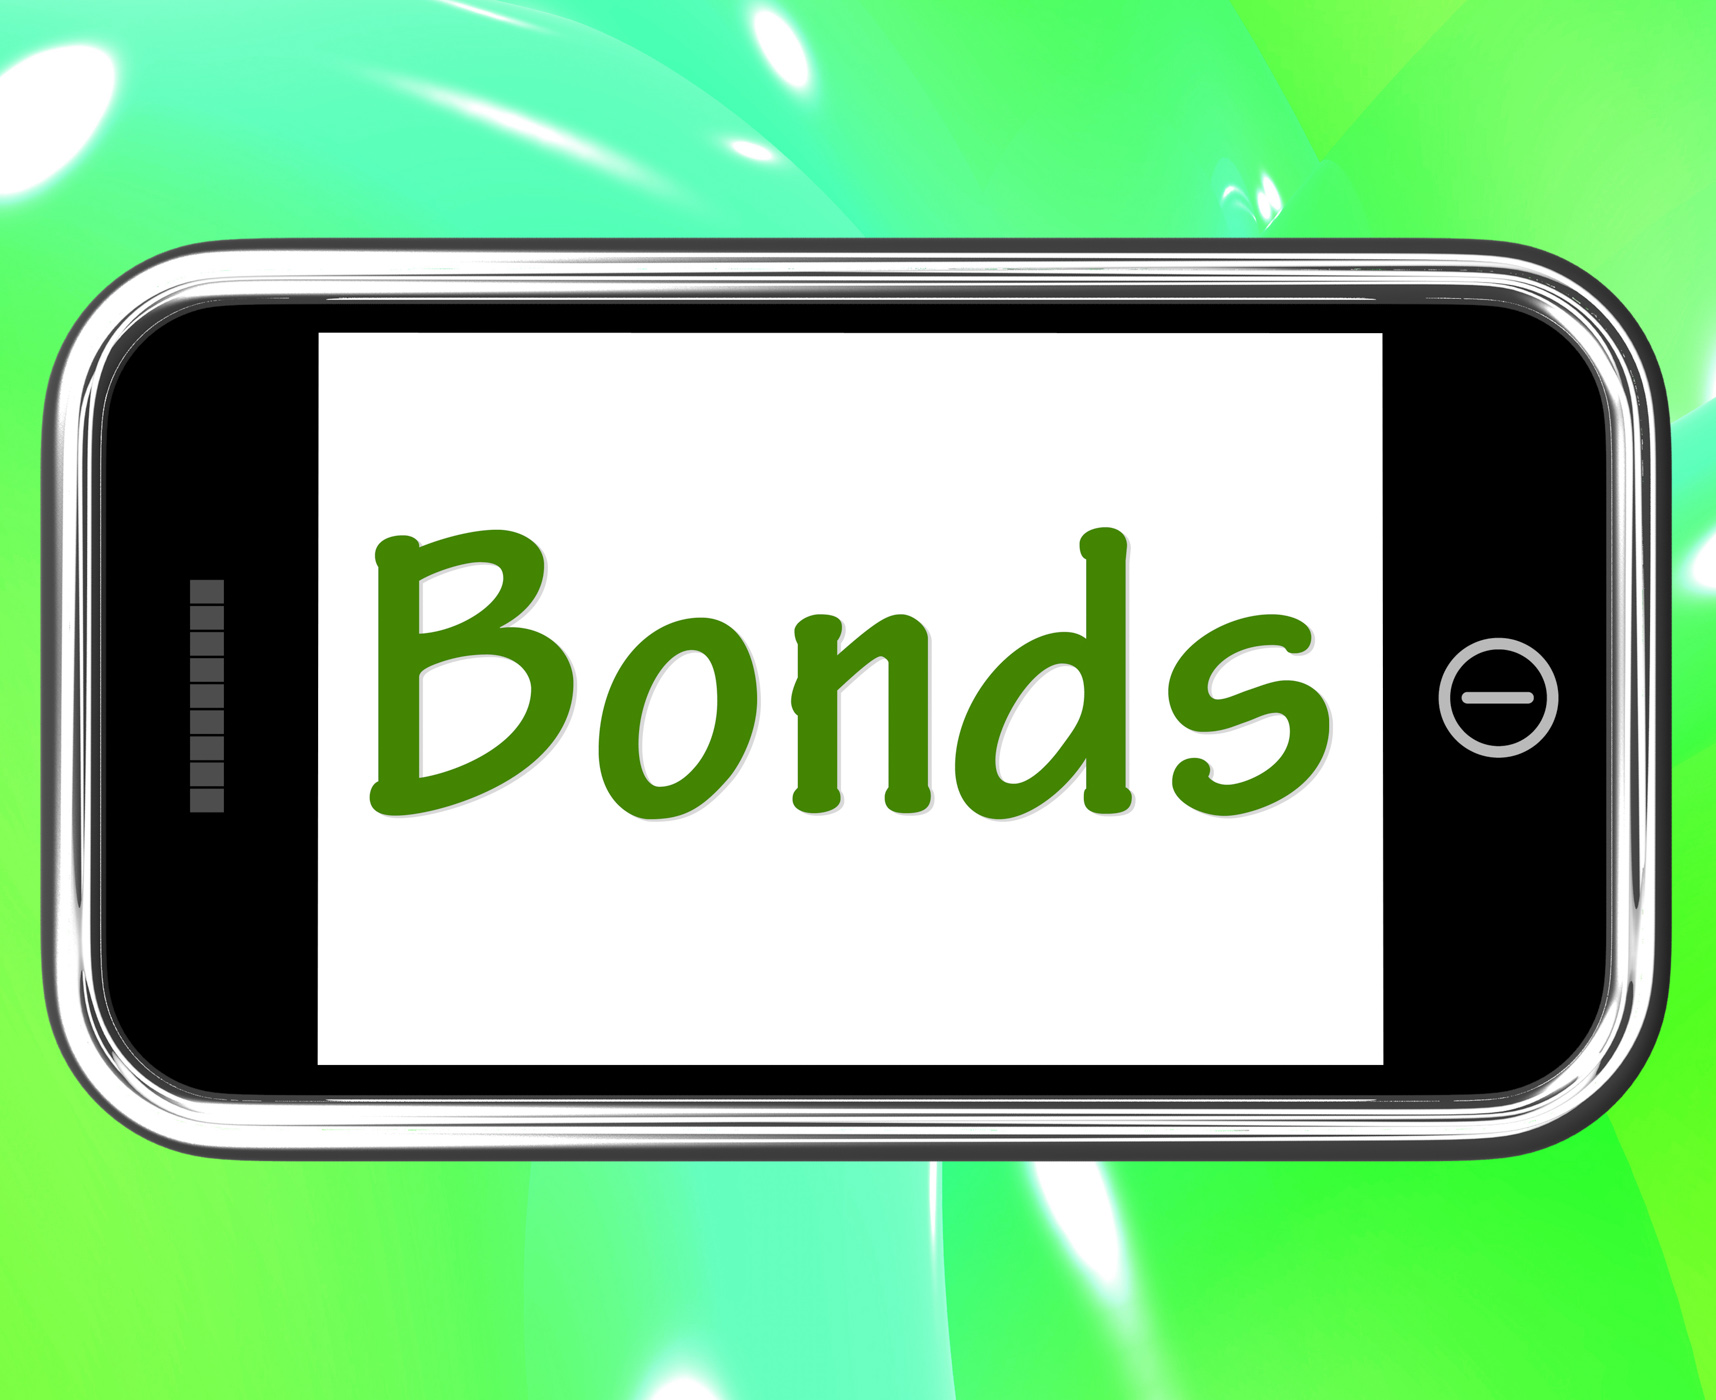 Bonds smartphone means online business connections and networking photo